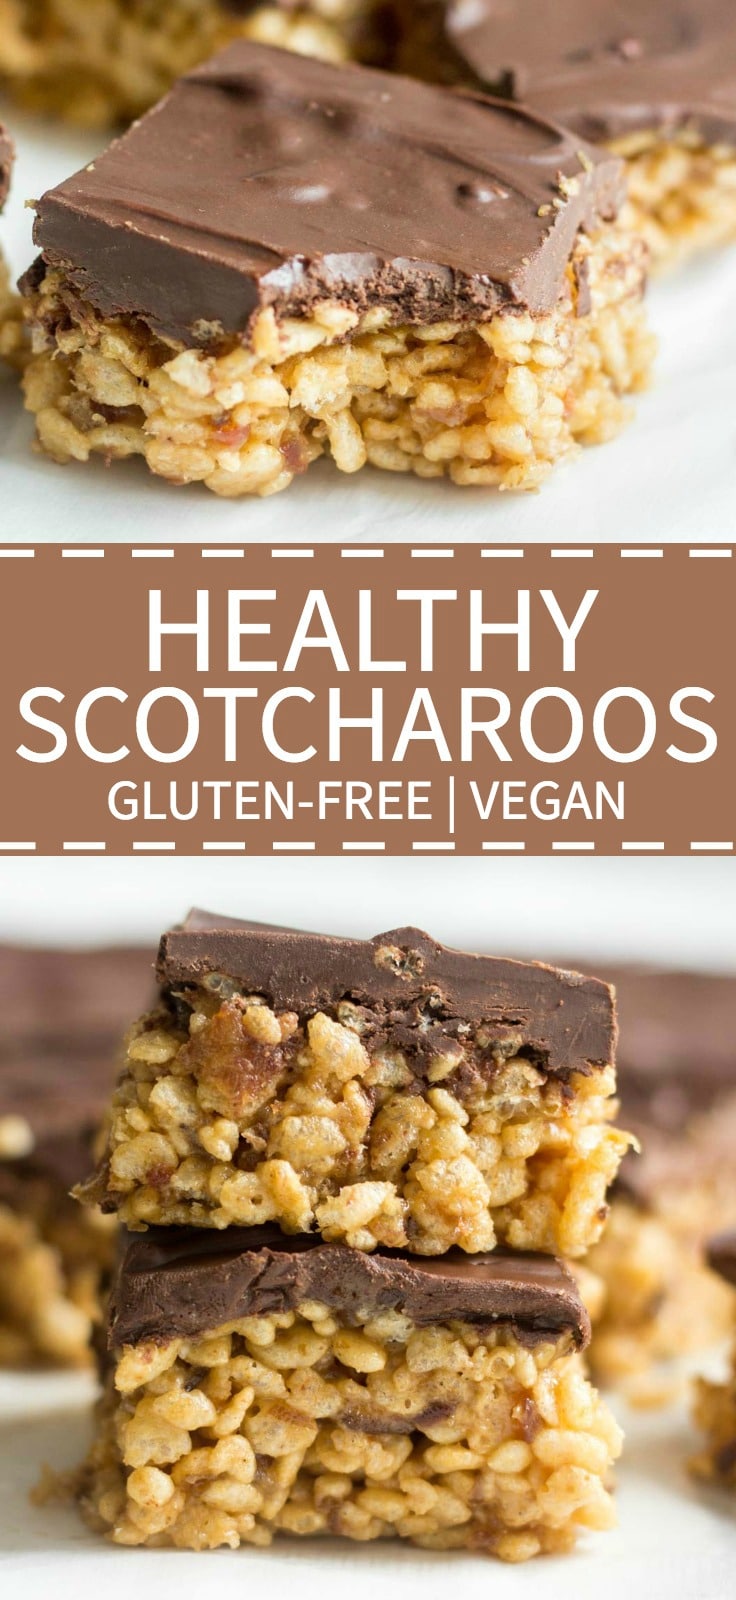 These healthy scotcharoos are a lightened up version of the classic recipe. They're gluten-free, vegan and refined sugar-free but you wouldn't notice at all! They're the healthy option when you are craving the sweet treat!